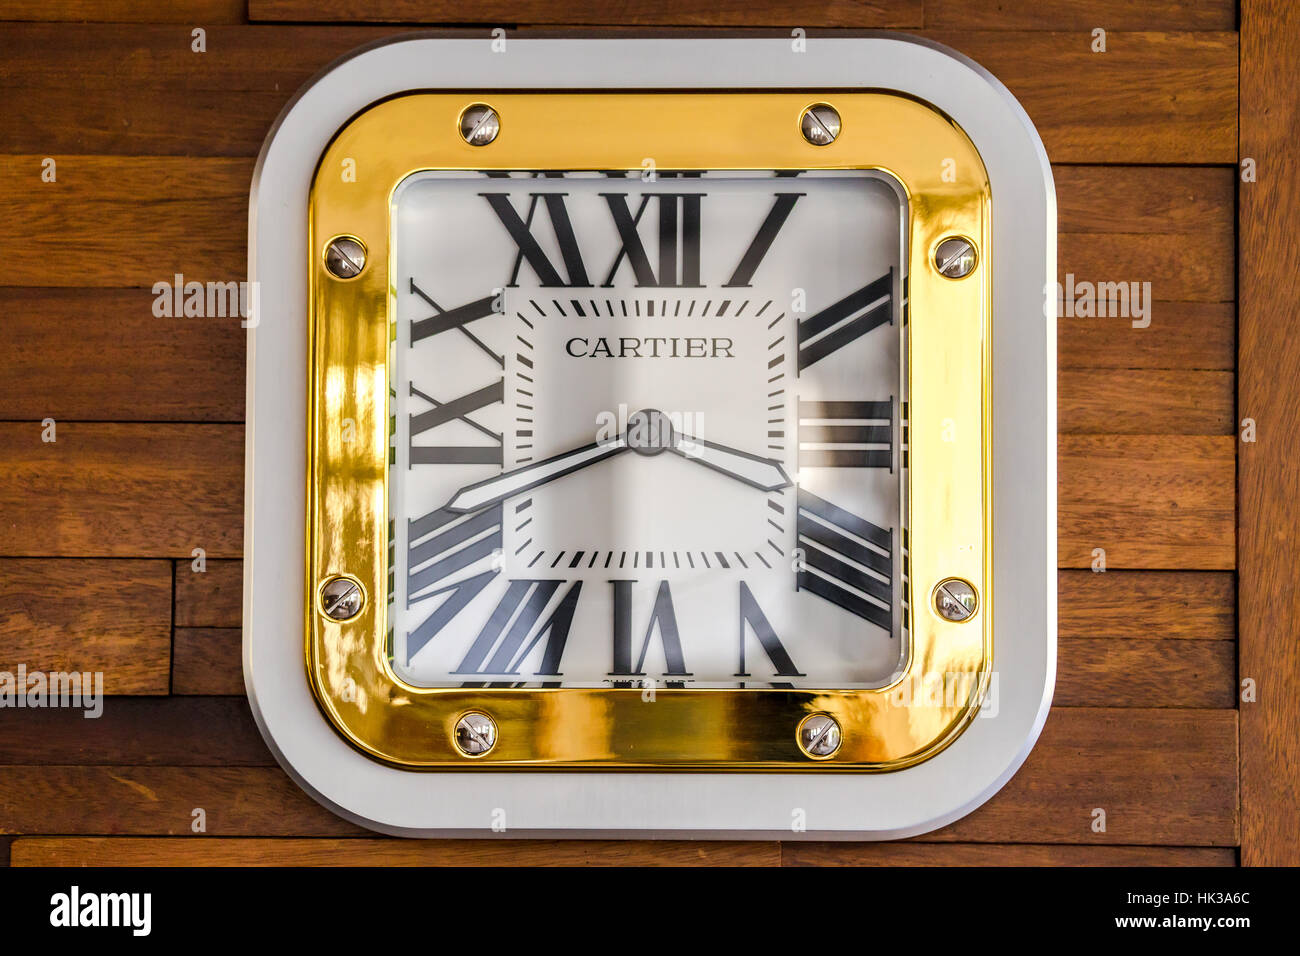 cartier wall clock for sale